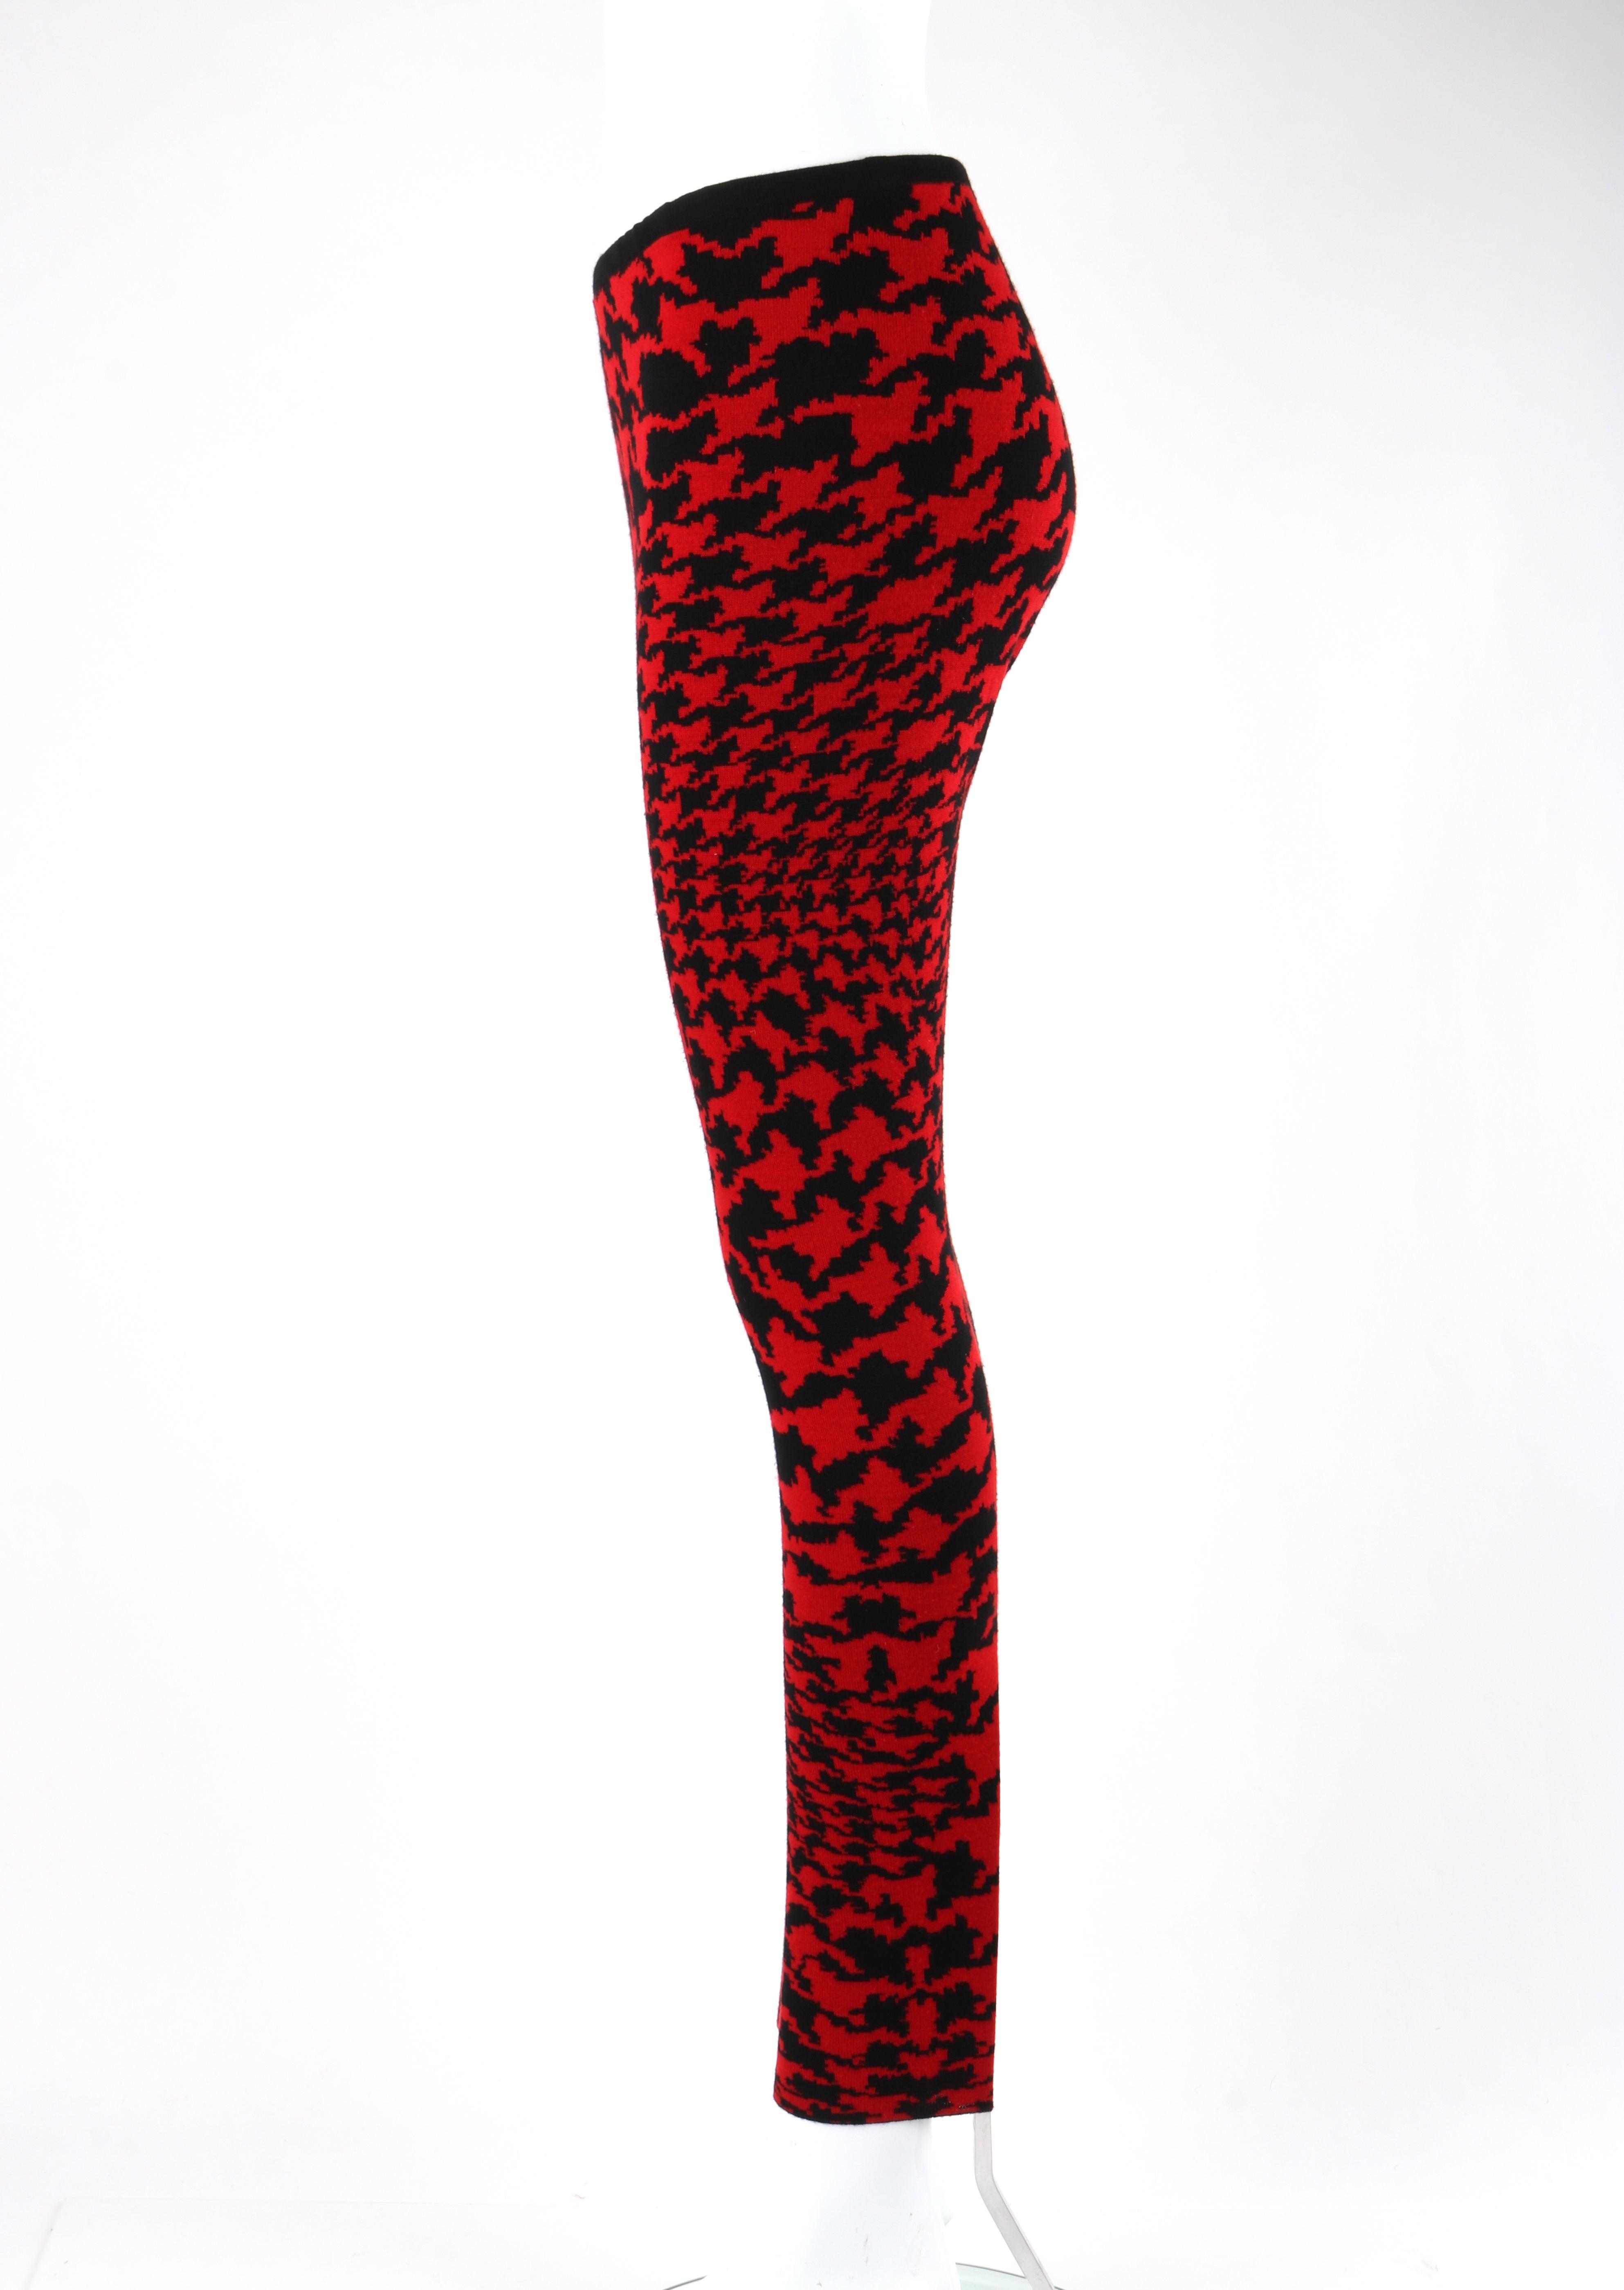 ALEXANDER McQUEEN A/W 2009 “The Horn Of Plenty” Red Houndstooth Knit Leggings XS In Good Condition For Sale In Thiensville, WI